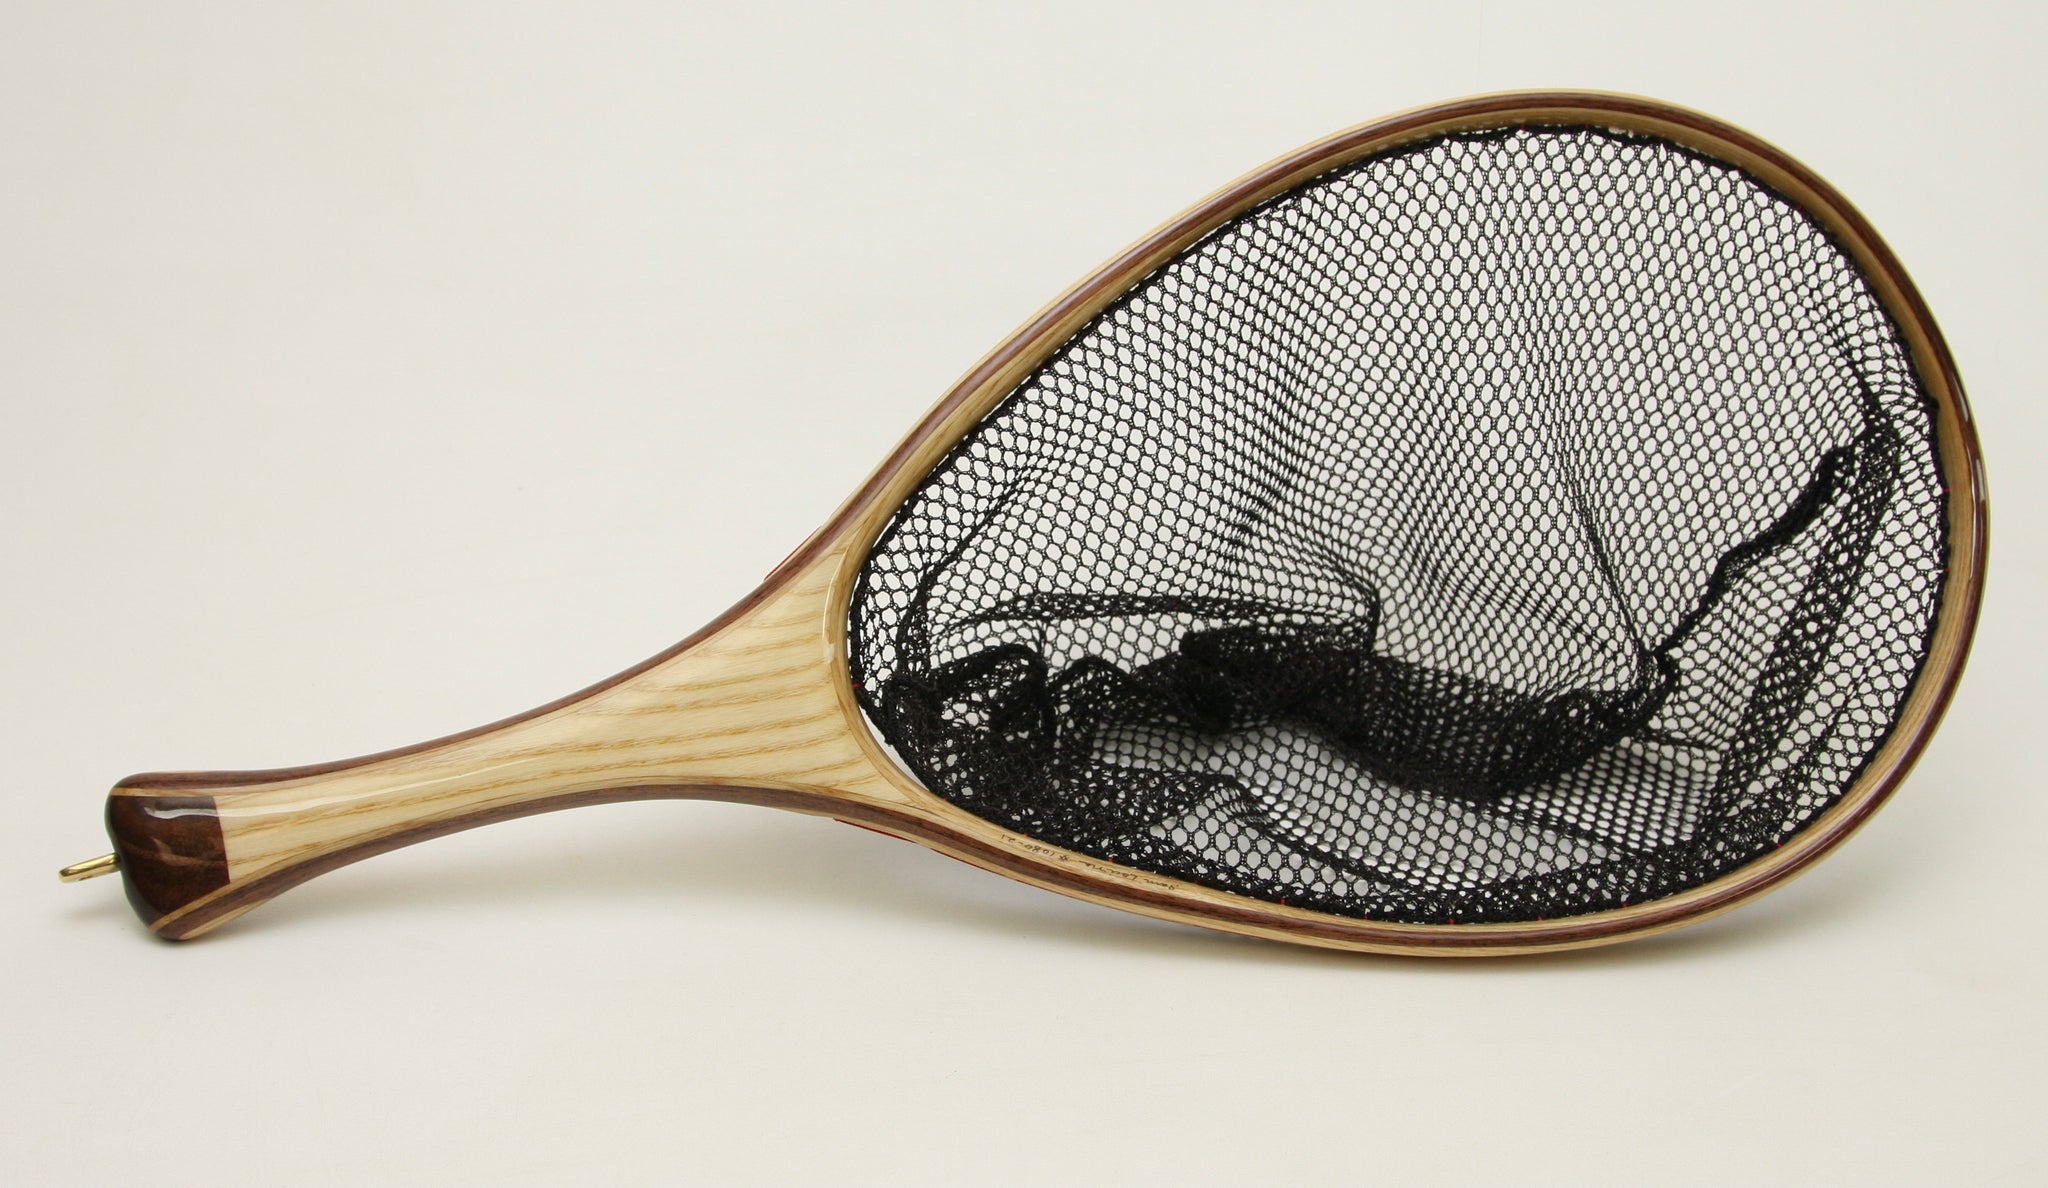 Medium sized Trout Net : Ash and Walnut - Nets that Honor the Fish